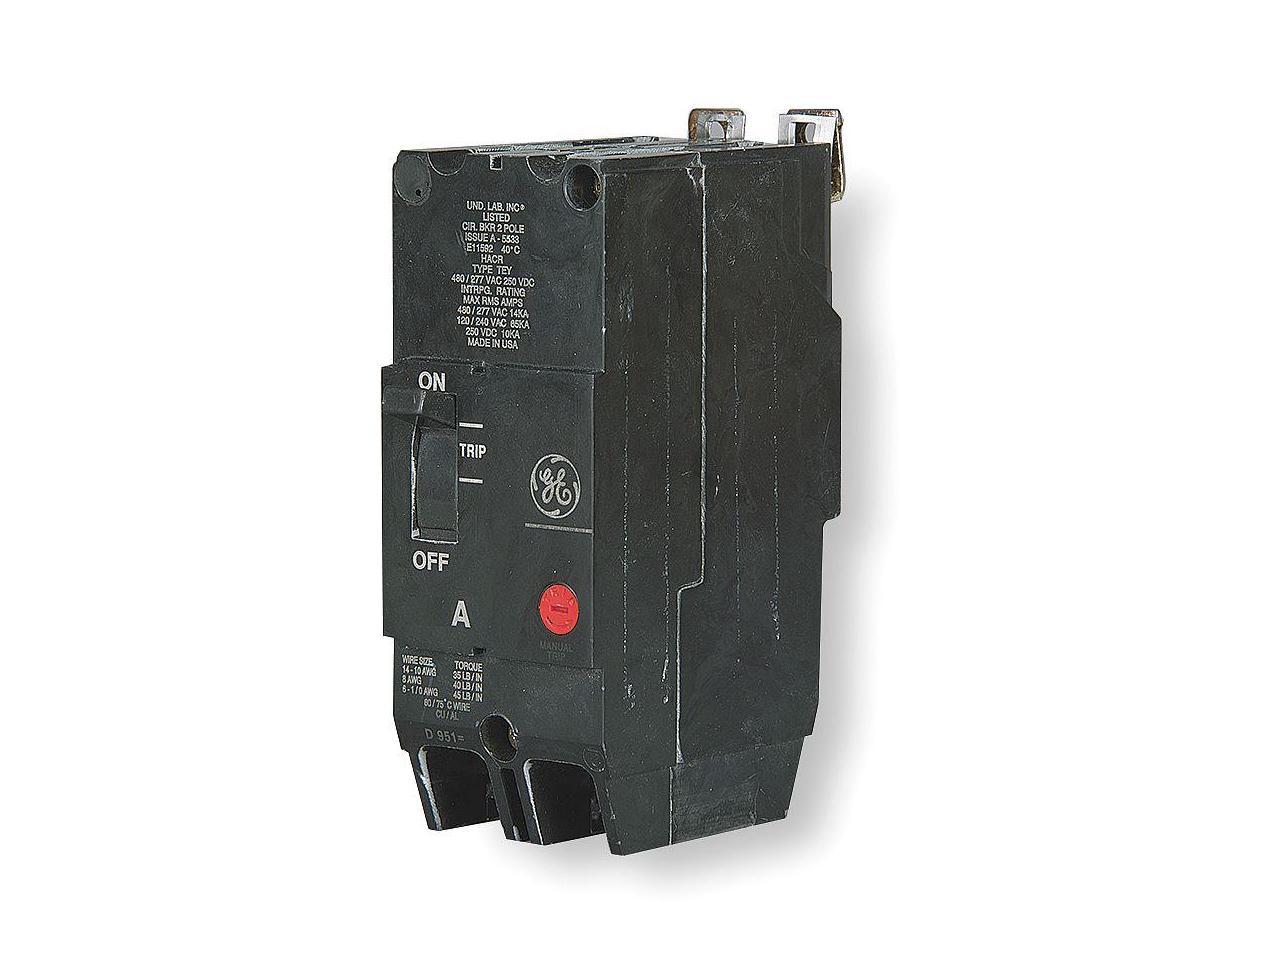 General Electric GE THQB32090 90 Amp 240 VAC 3 Pole Circuit Breaker for sale online 